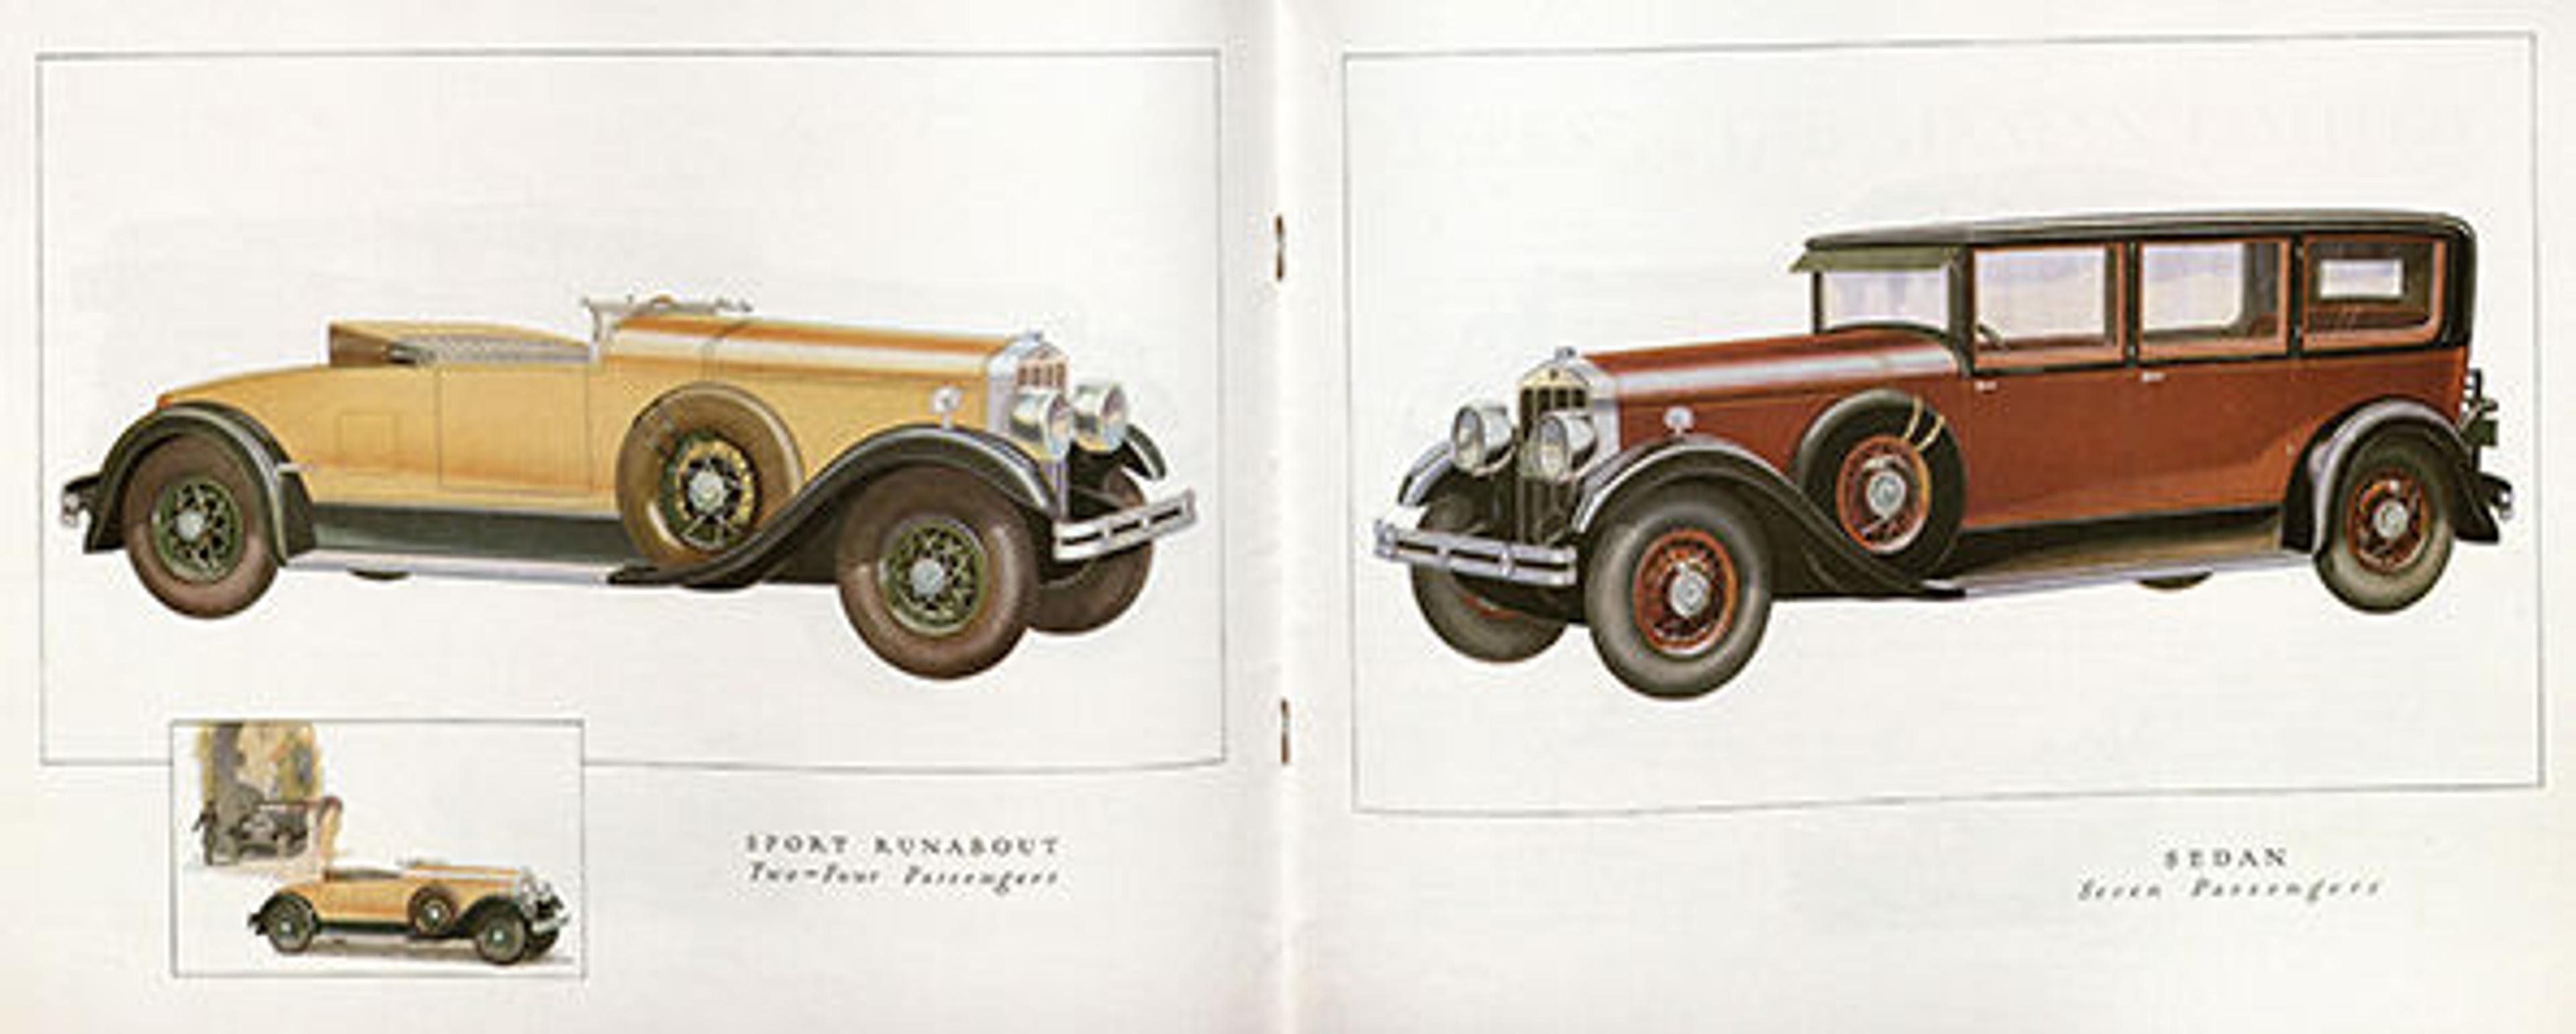 Franklin Automobile Company (1902-1934) advertising the Series 12B "Airman Limited"